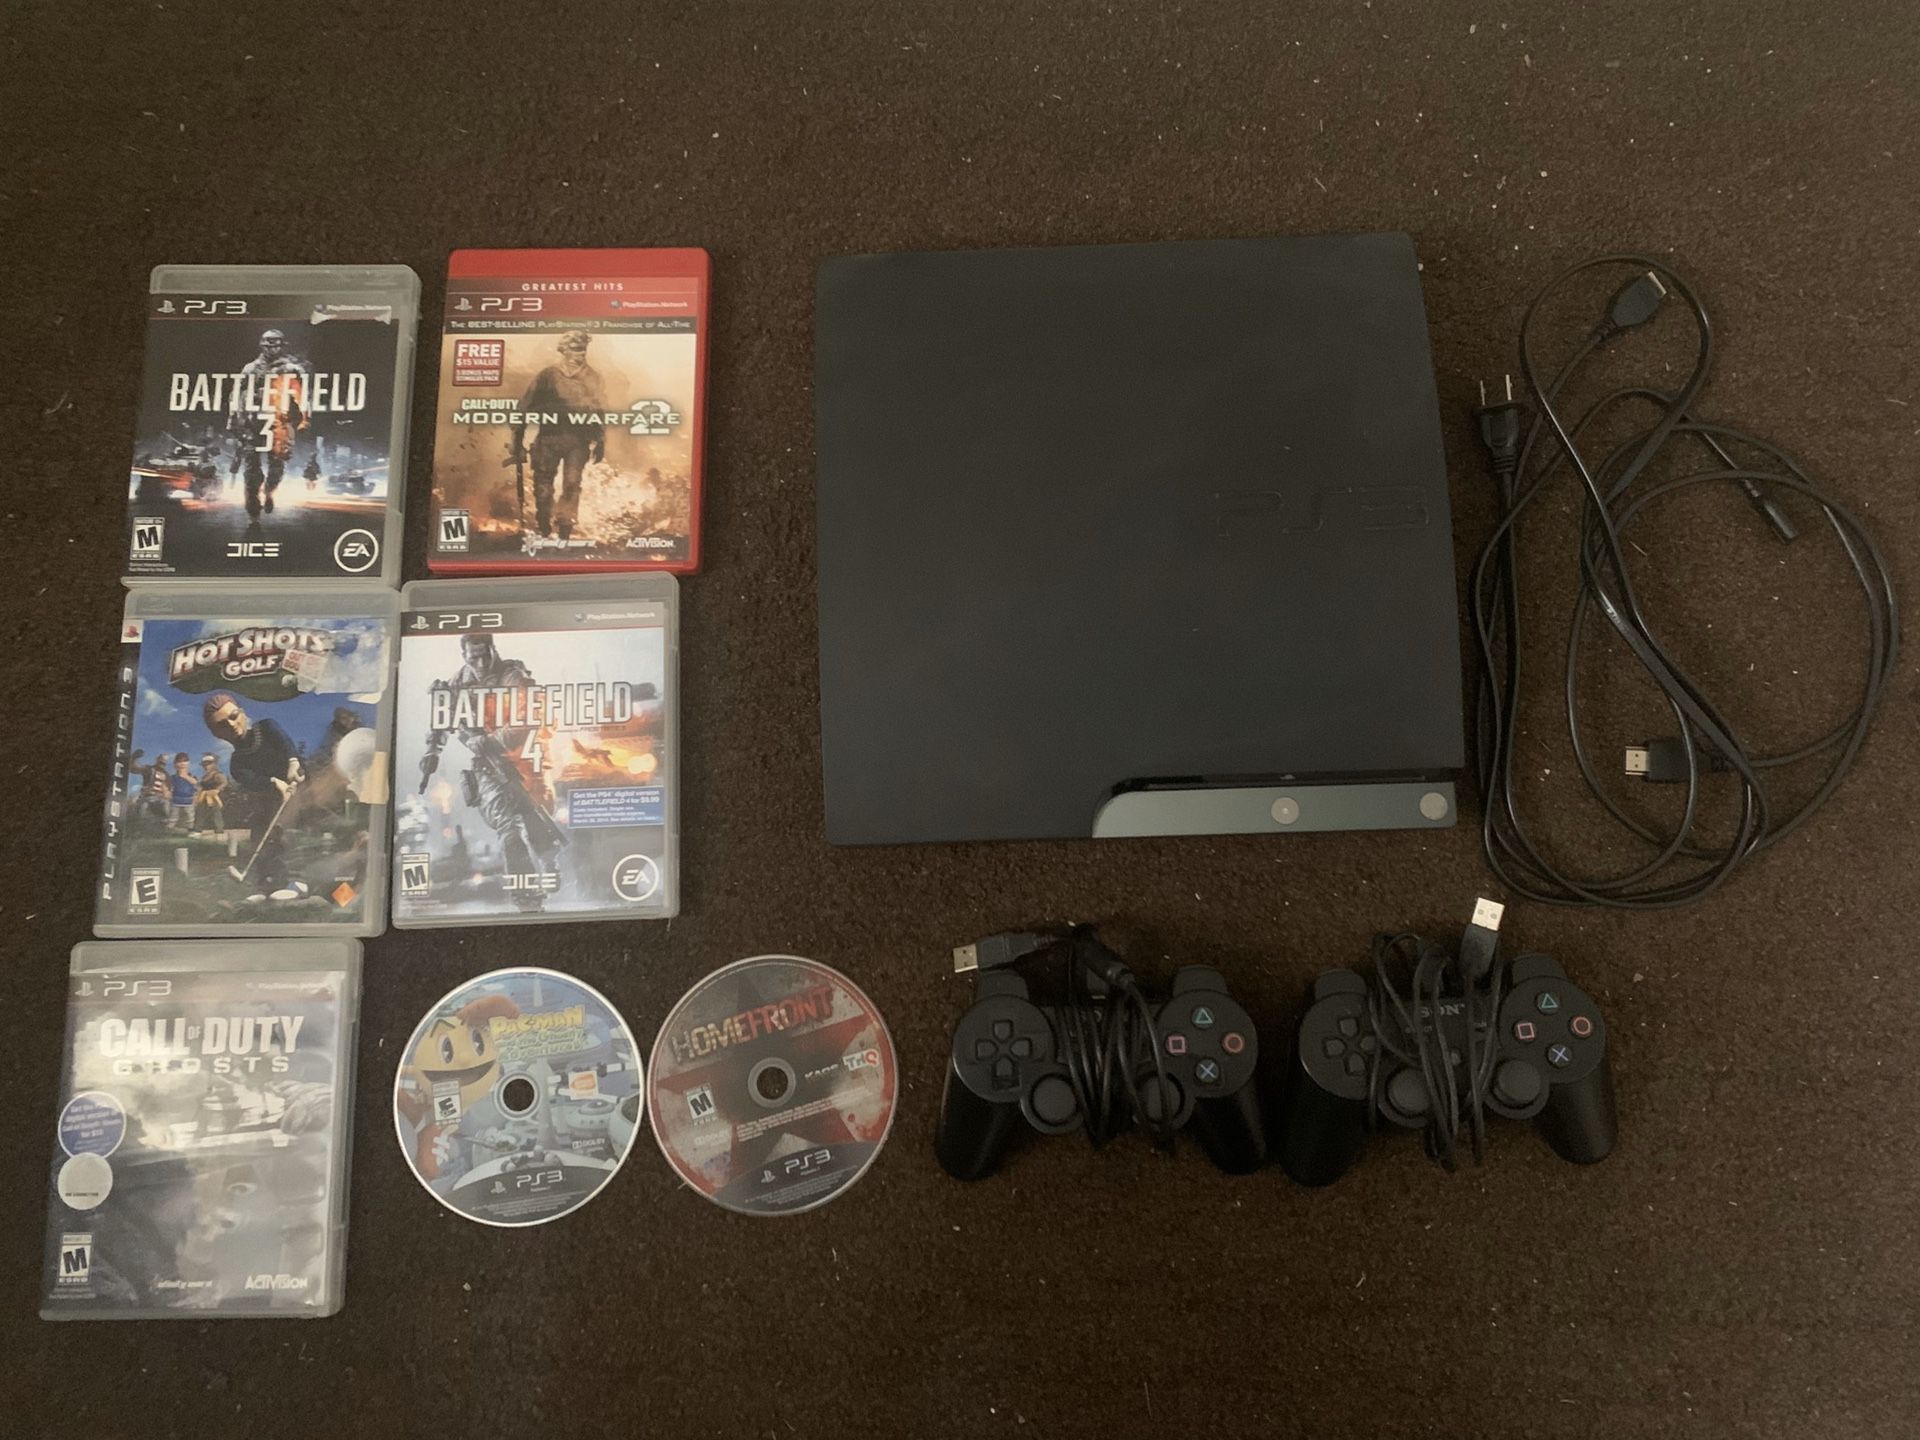 Sony PS3 System with games